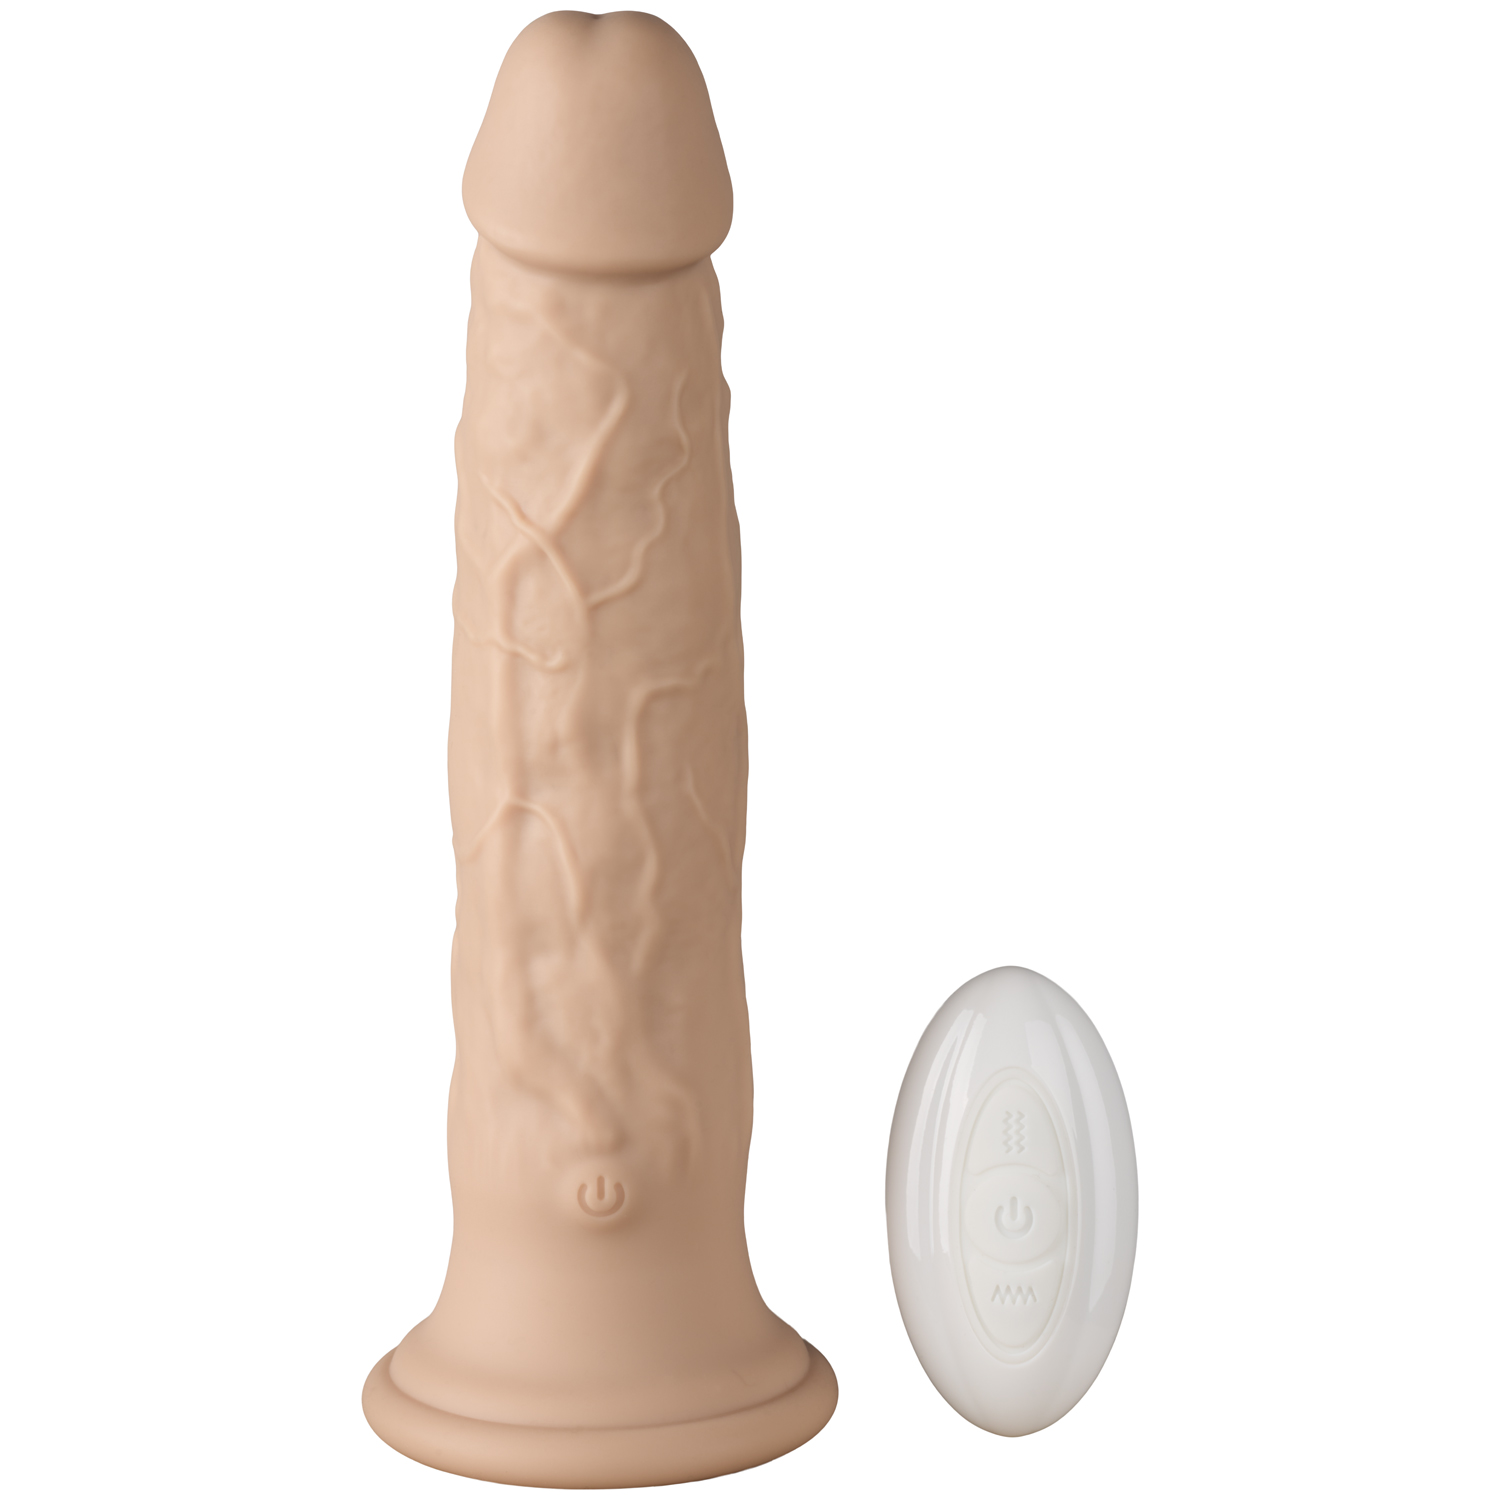 Willy City Rotating Beads Vibrerende Dildo 23 cm - Nude thumbnail